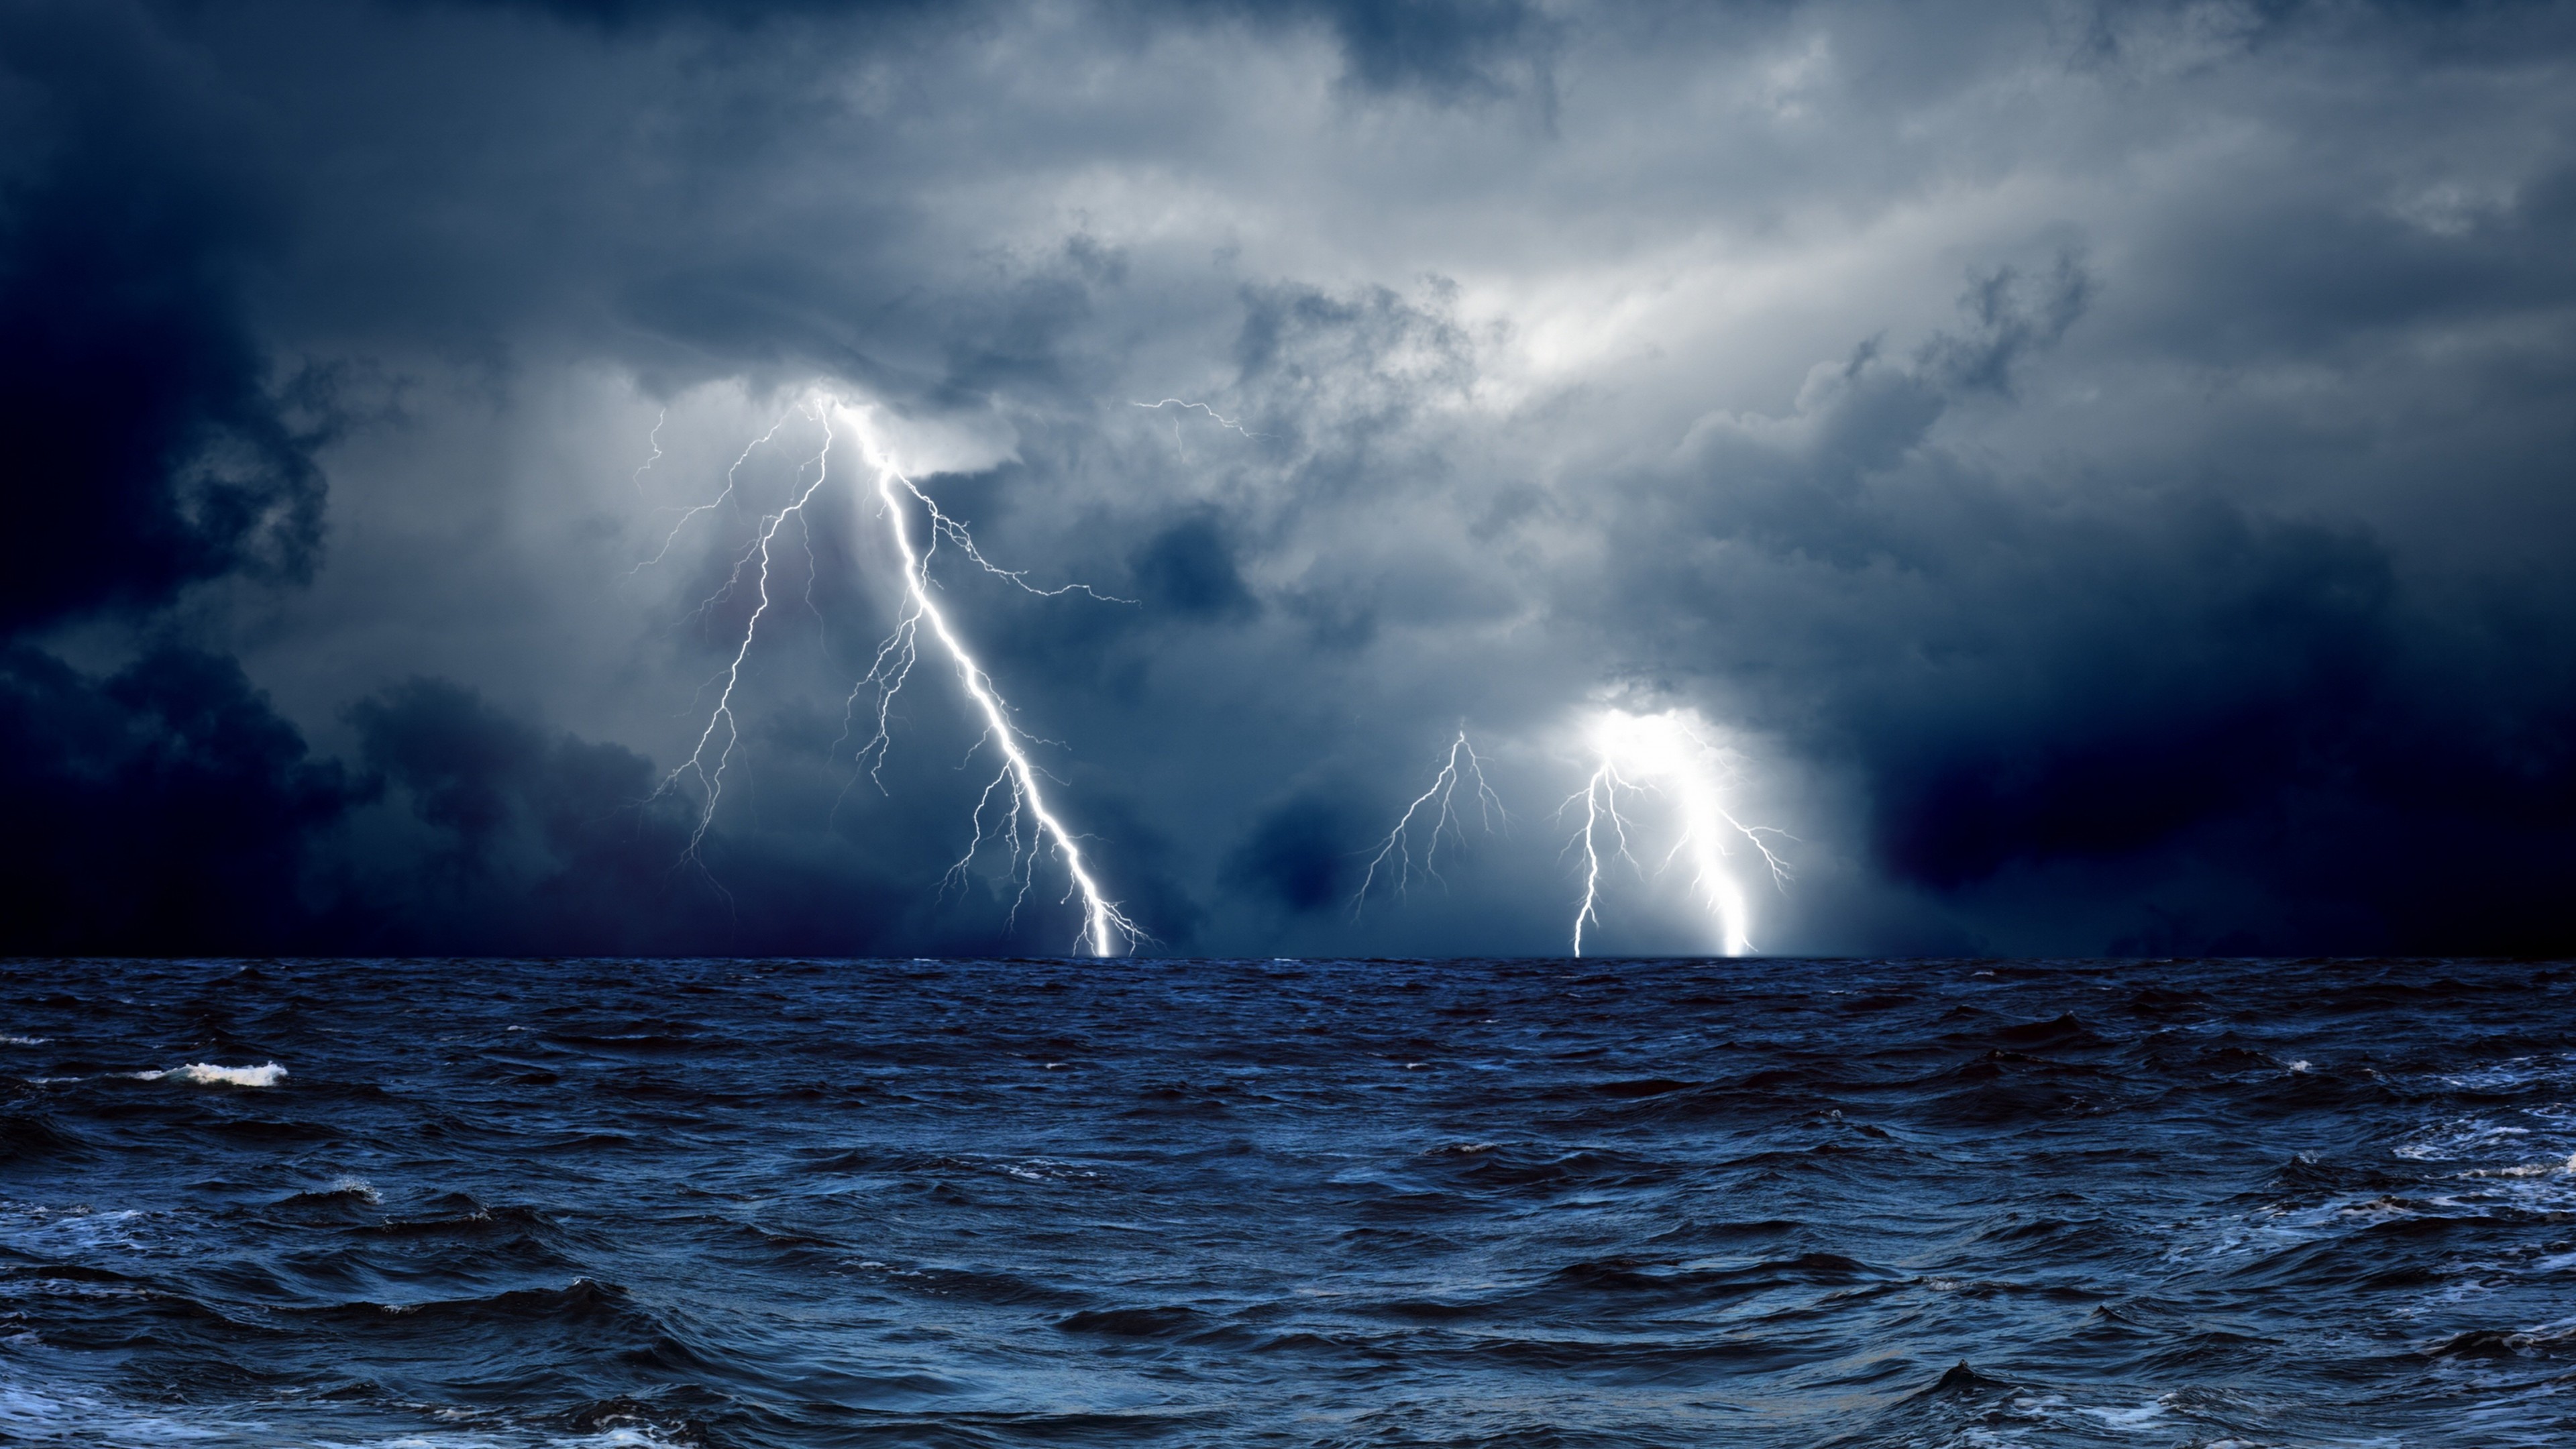 Stormy Ocean wallpaper Collections